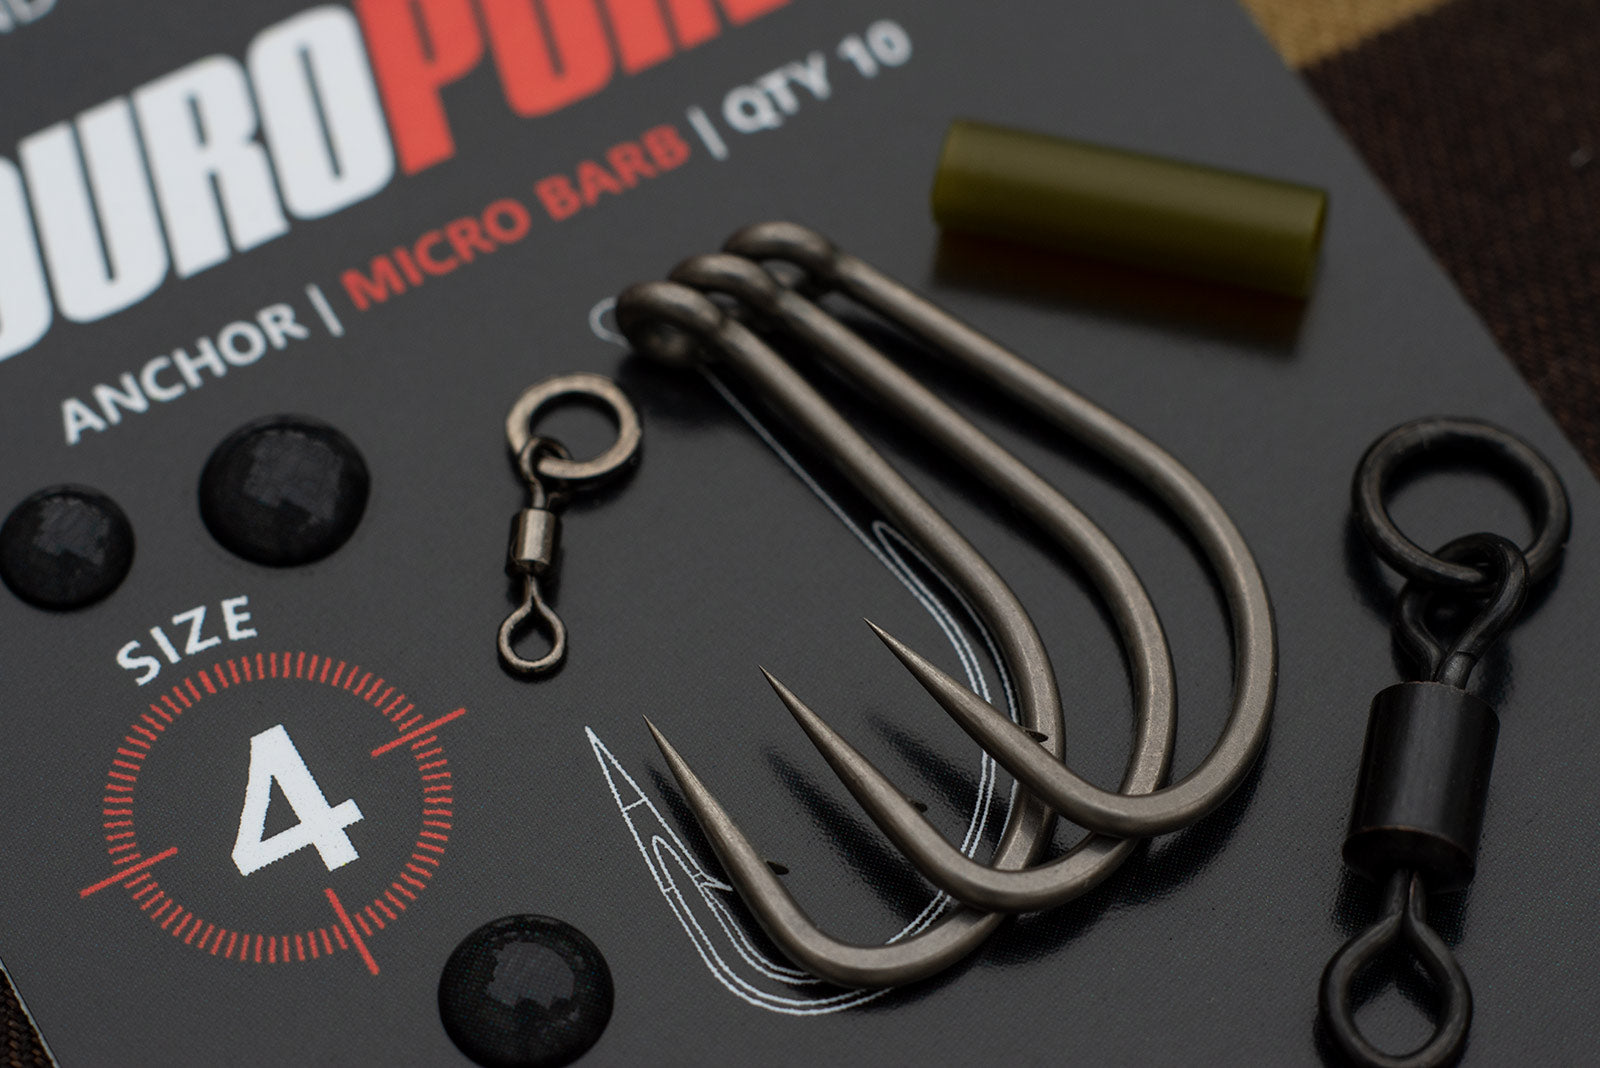  Duropoint Anchor hooks - The Horton Rig